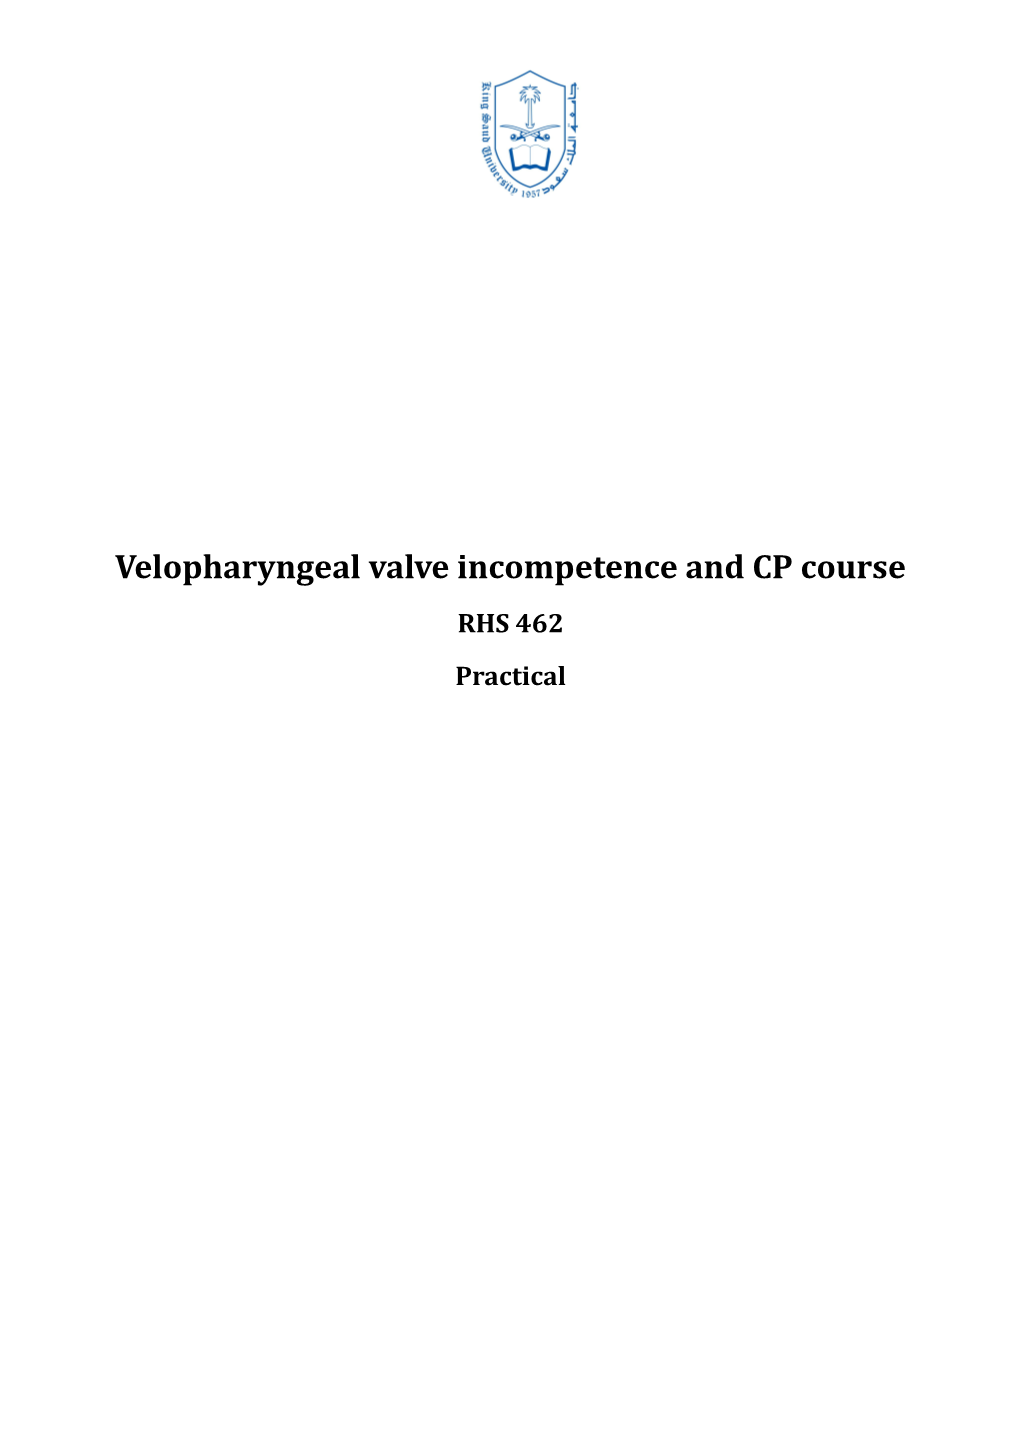 Velopharyngeal Valve Incompetence and CP Course